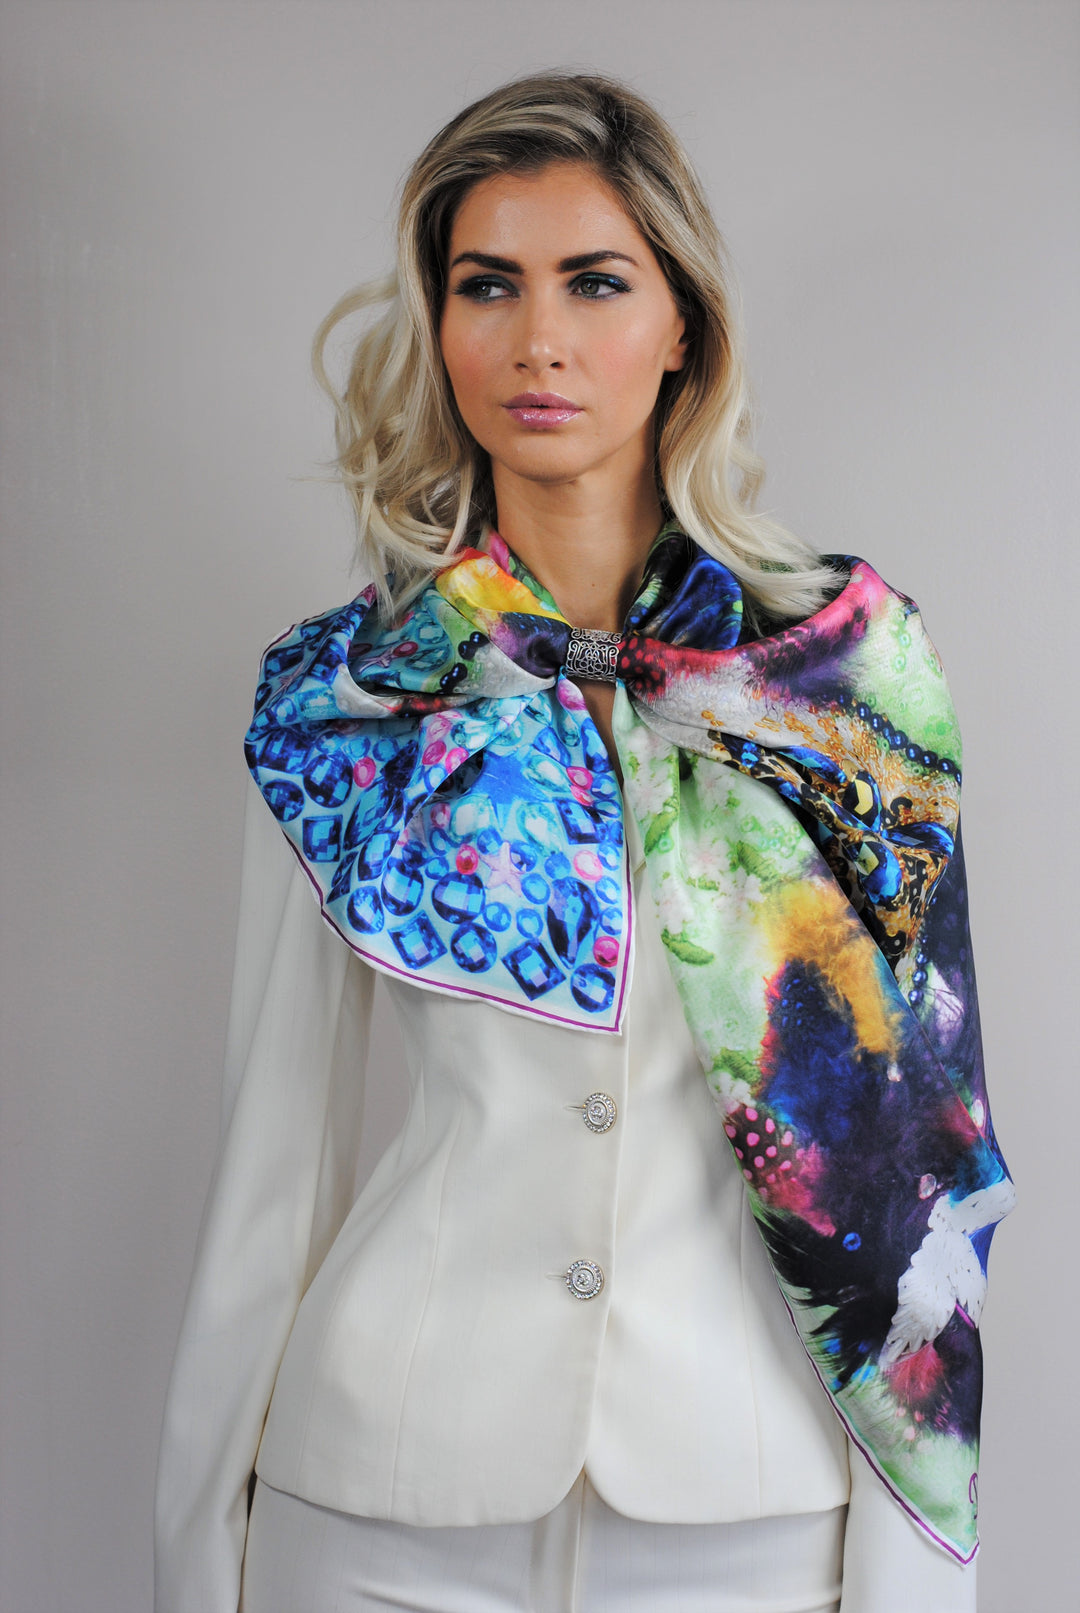 Fine Art Copy Best Gift For her BE HAPPY Wearable Art Pure Silk Scarf Bird Of happiness Bright 100% Silk Shawl by Chicago Fashion Designer Alesia Chaika